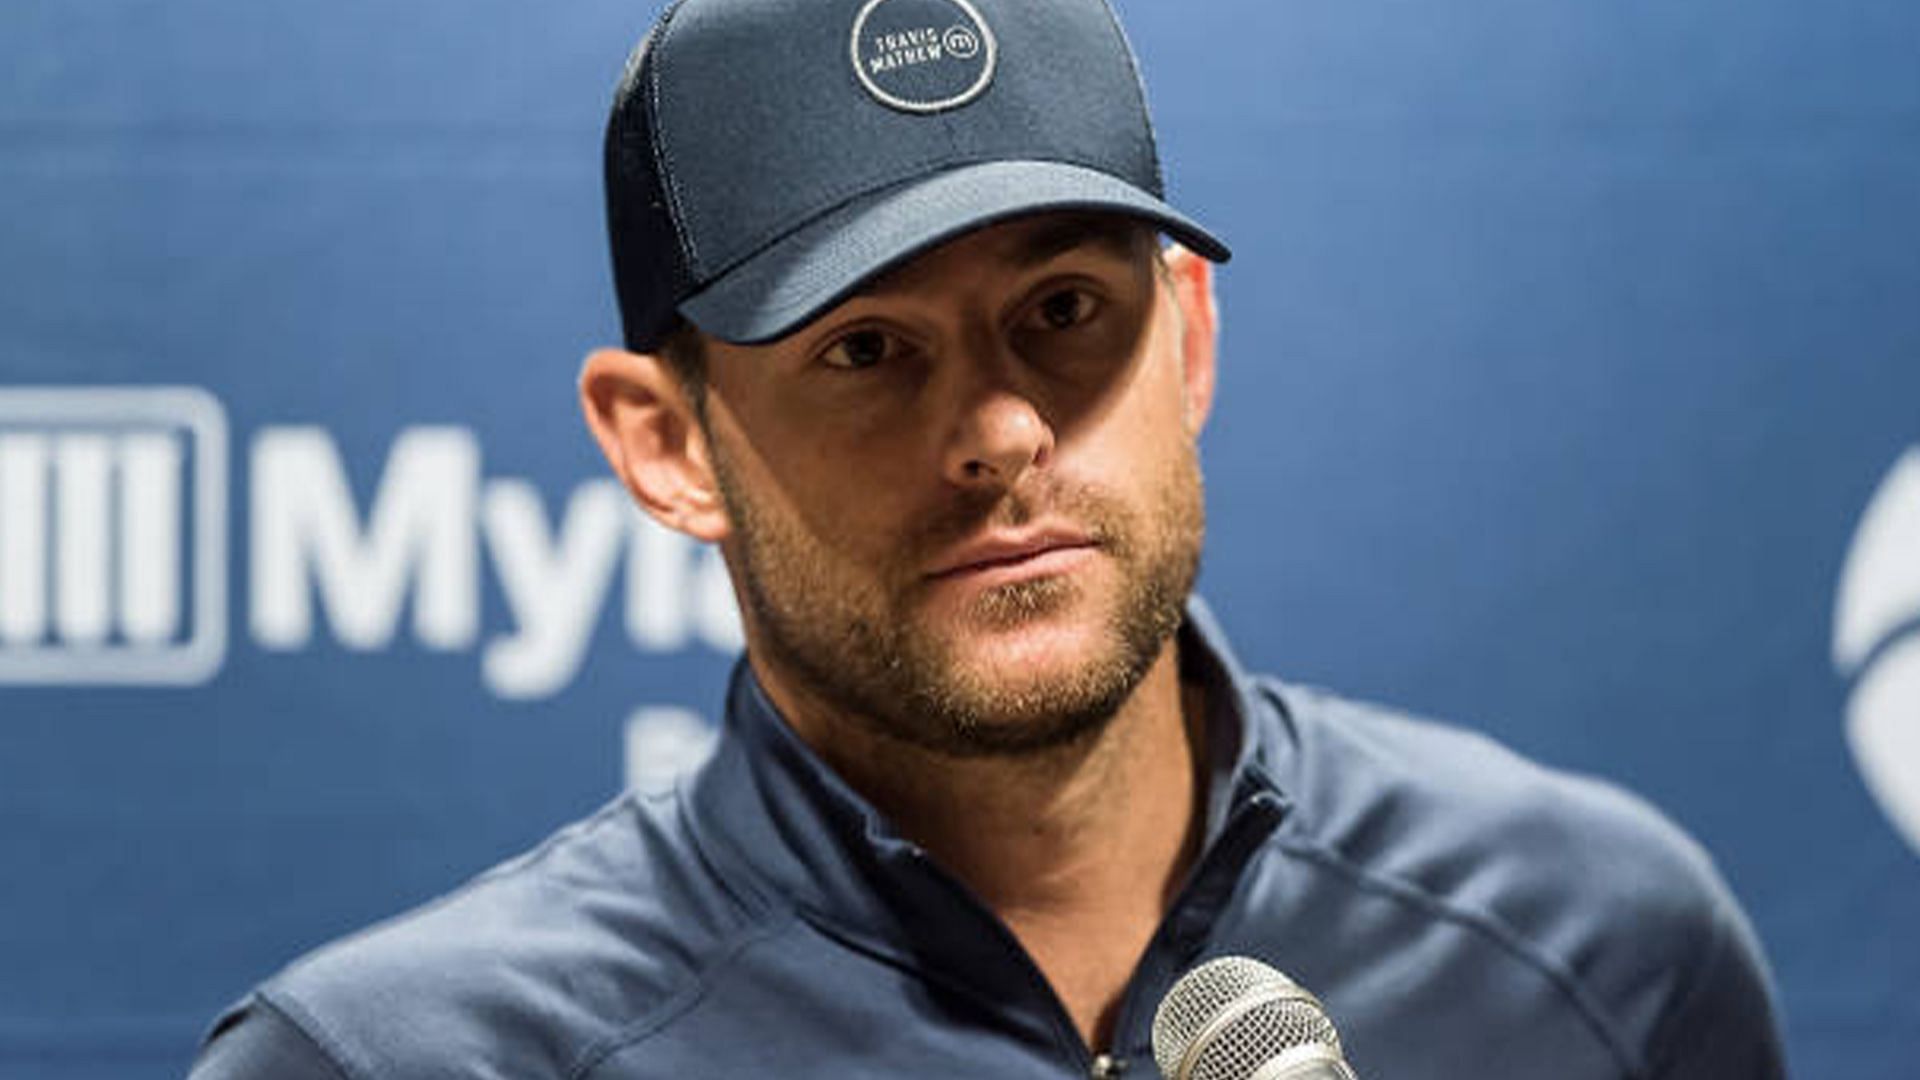 Andy Roddick was baffled by an NBA analyst